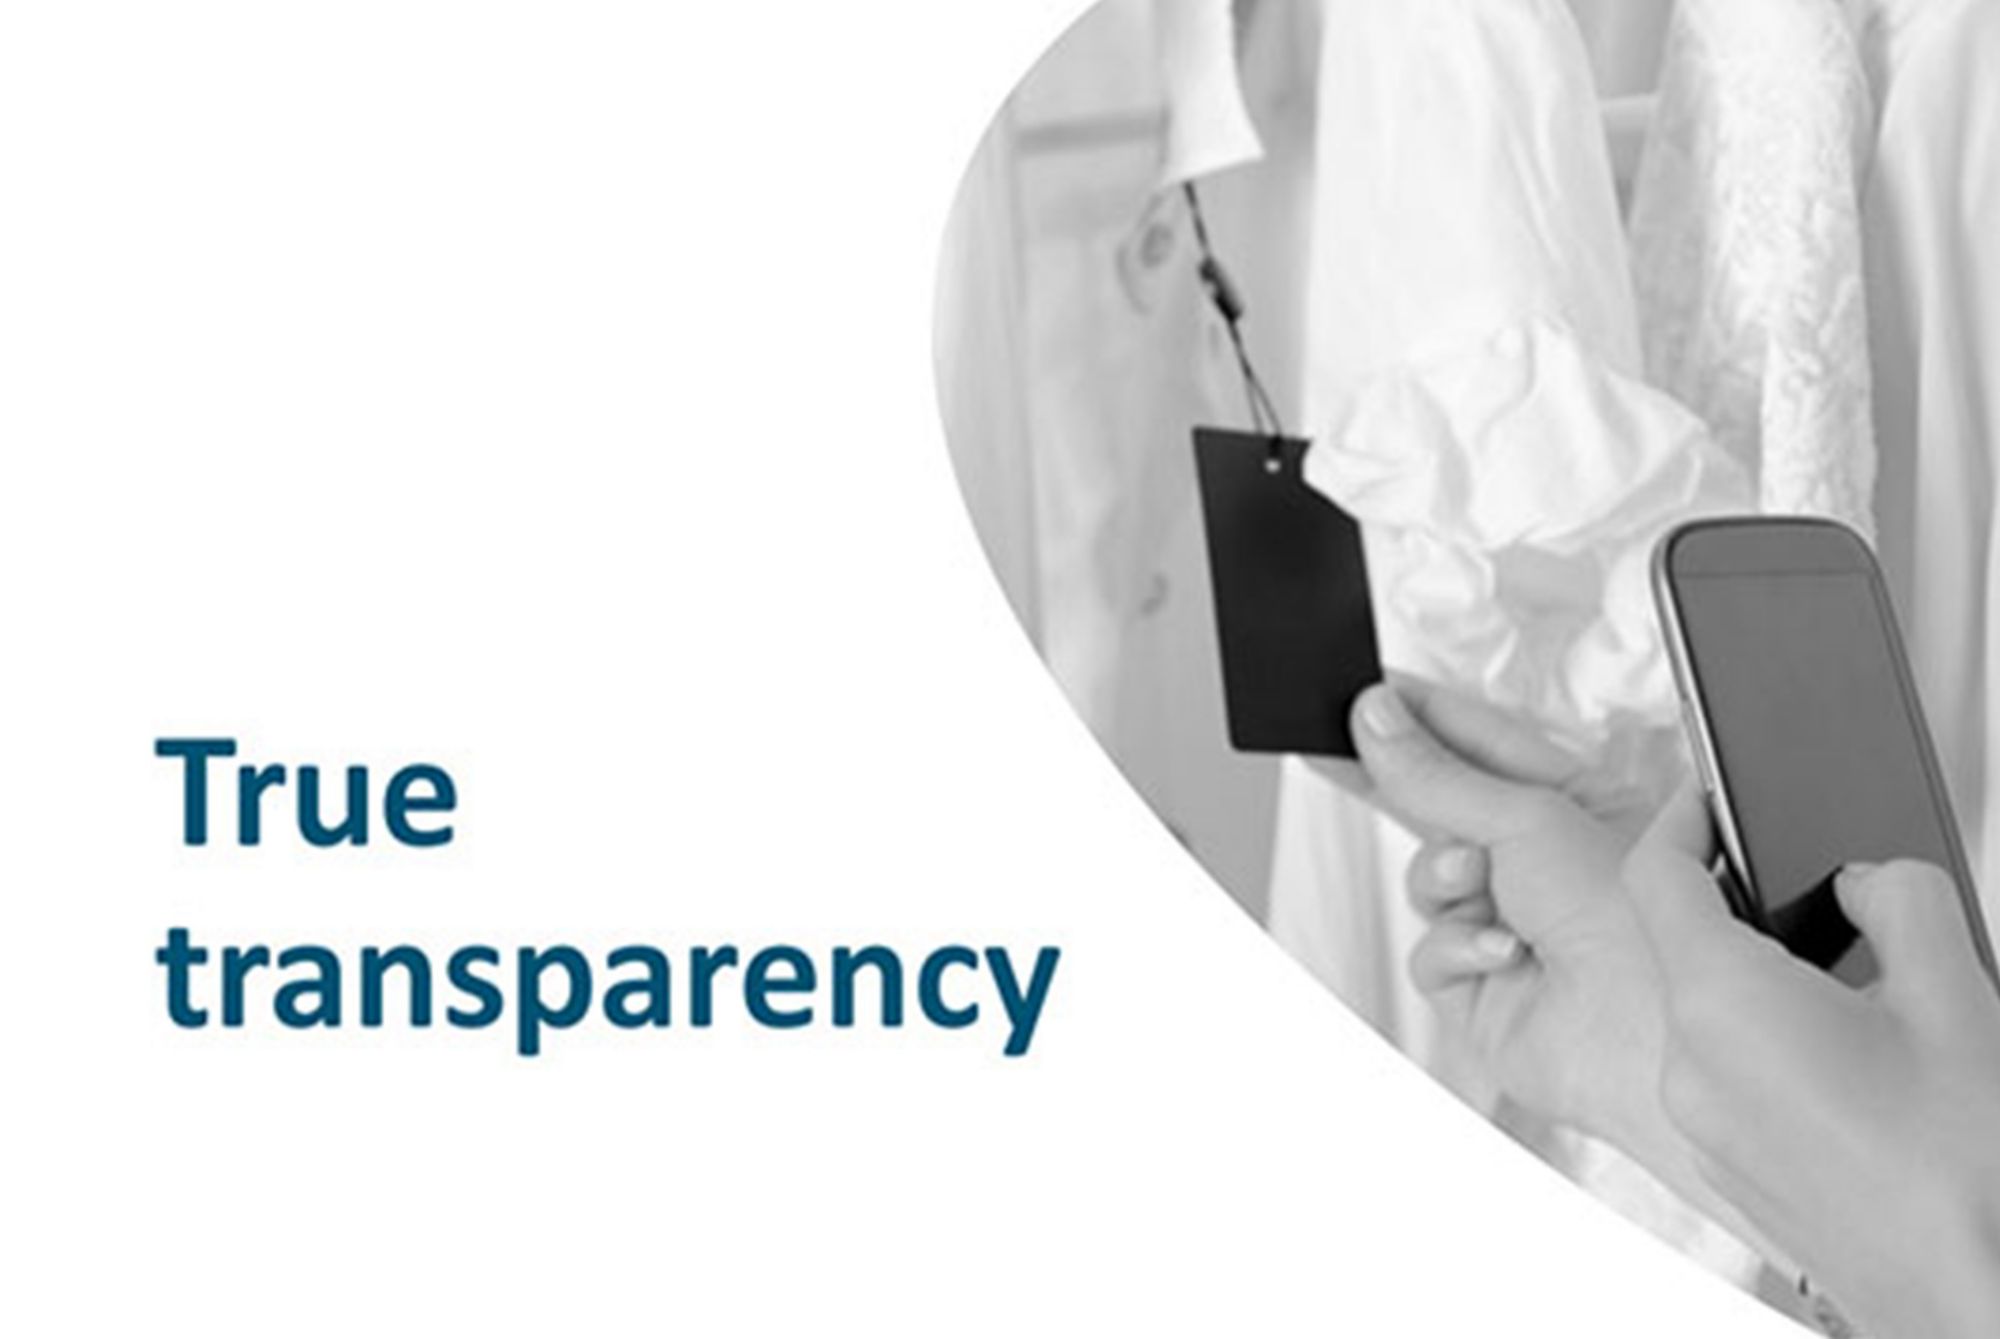 True transparency graphic 